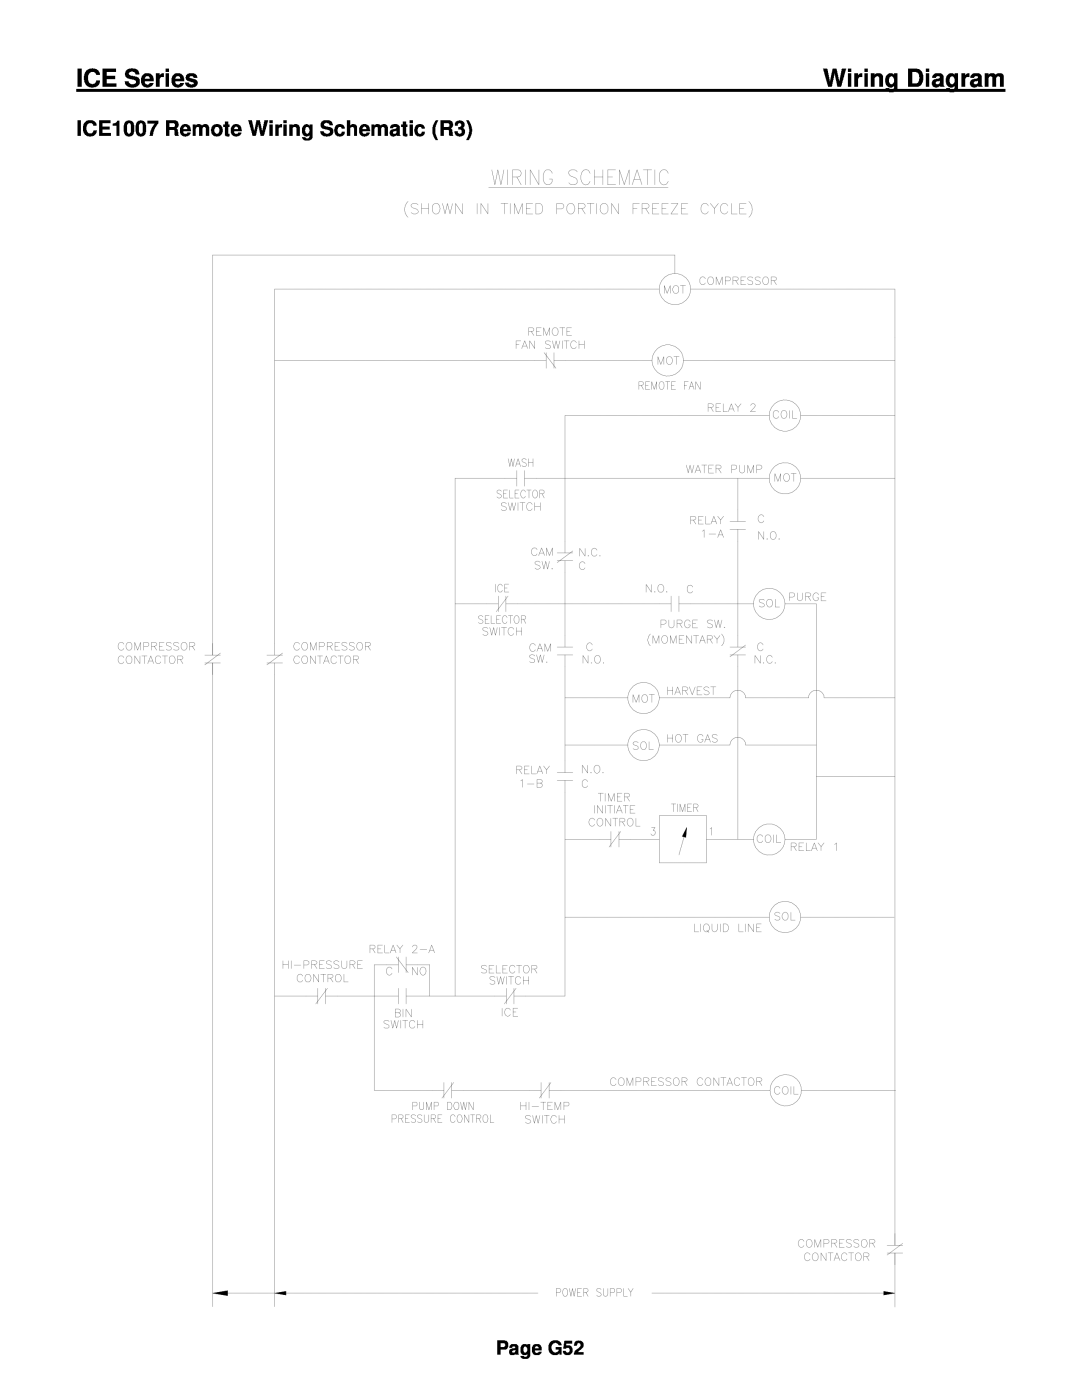 Ice-O-Matic ICE0250 Series installation manual ICE1007 Remote Wiring Schematic R3, ICE Series, Wiring Diagram, Page G52 